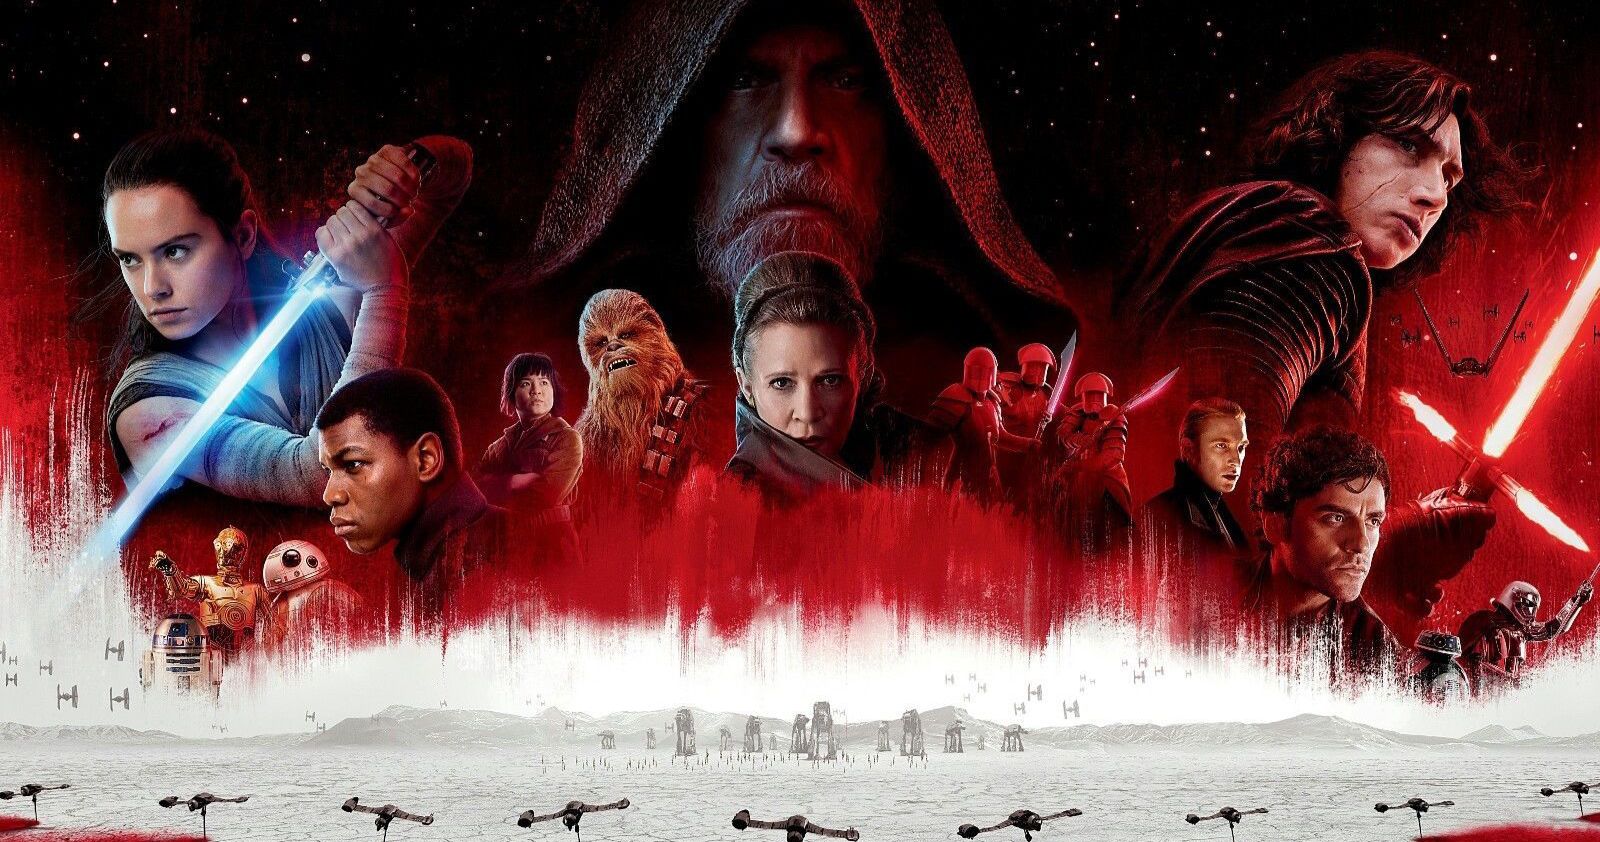 Iconic Star Wars Author Alan Dean Foster Hated The Last Jedi, Calls It a Terrible Film